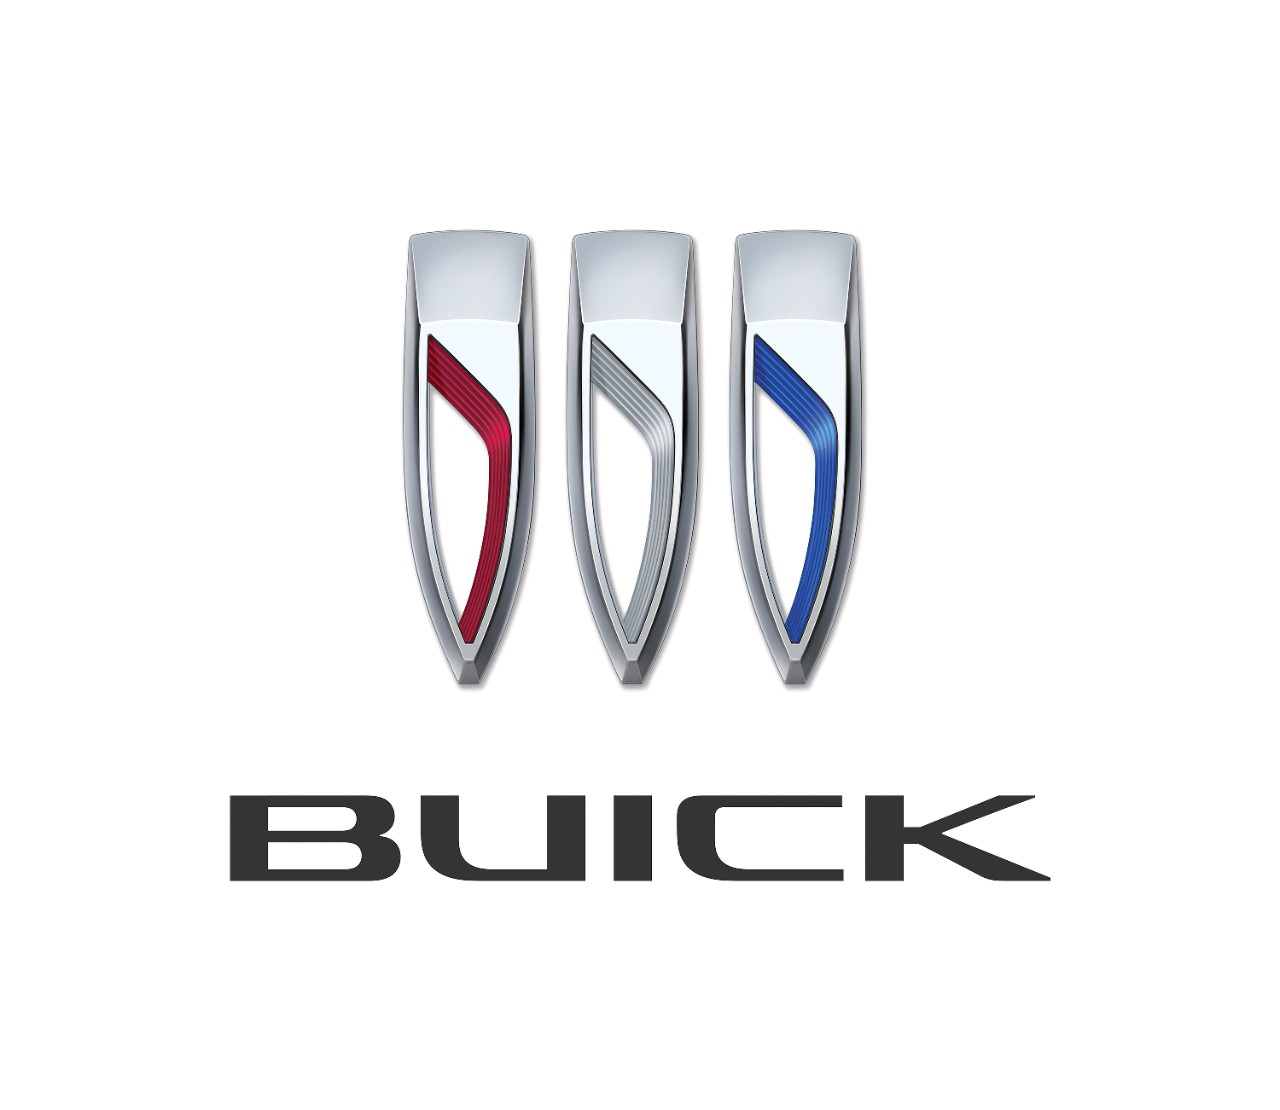 The new Buick logo set against a white background